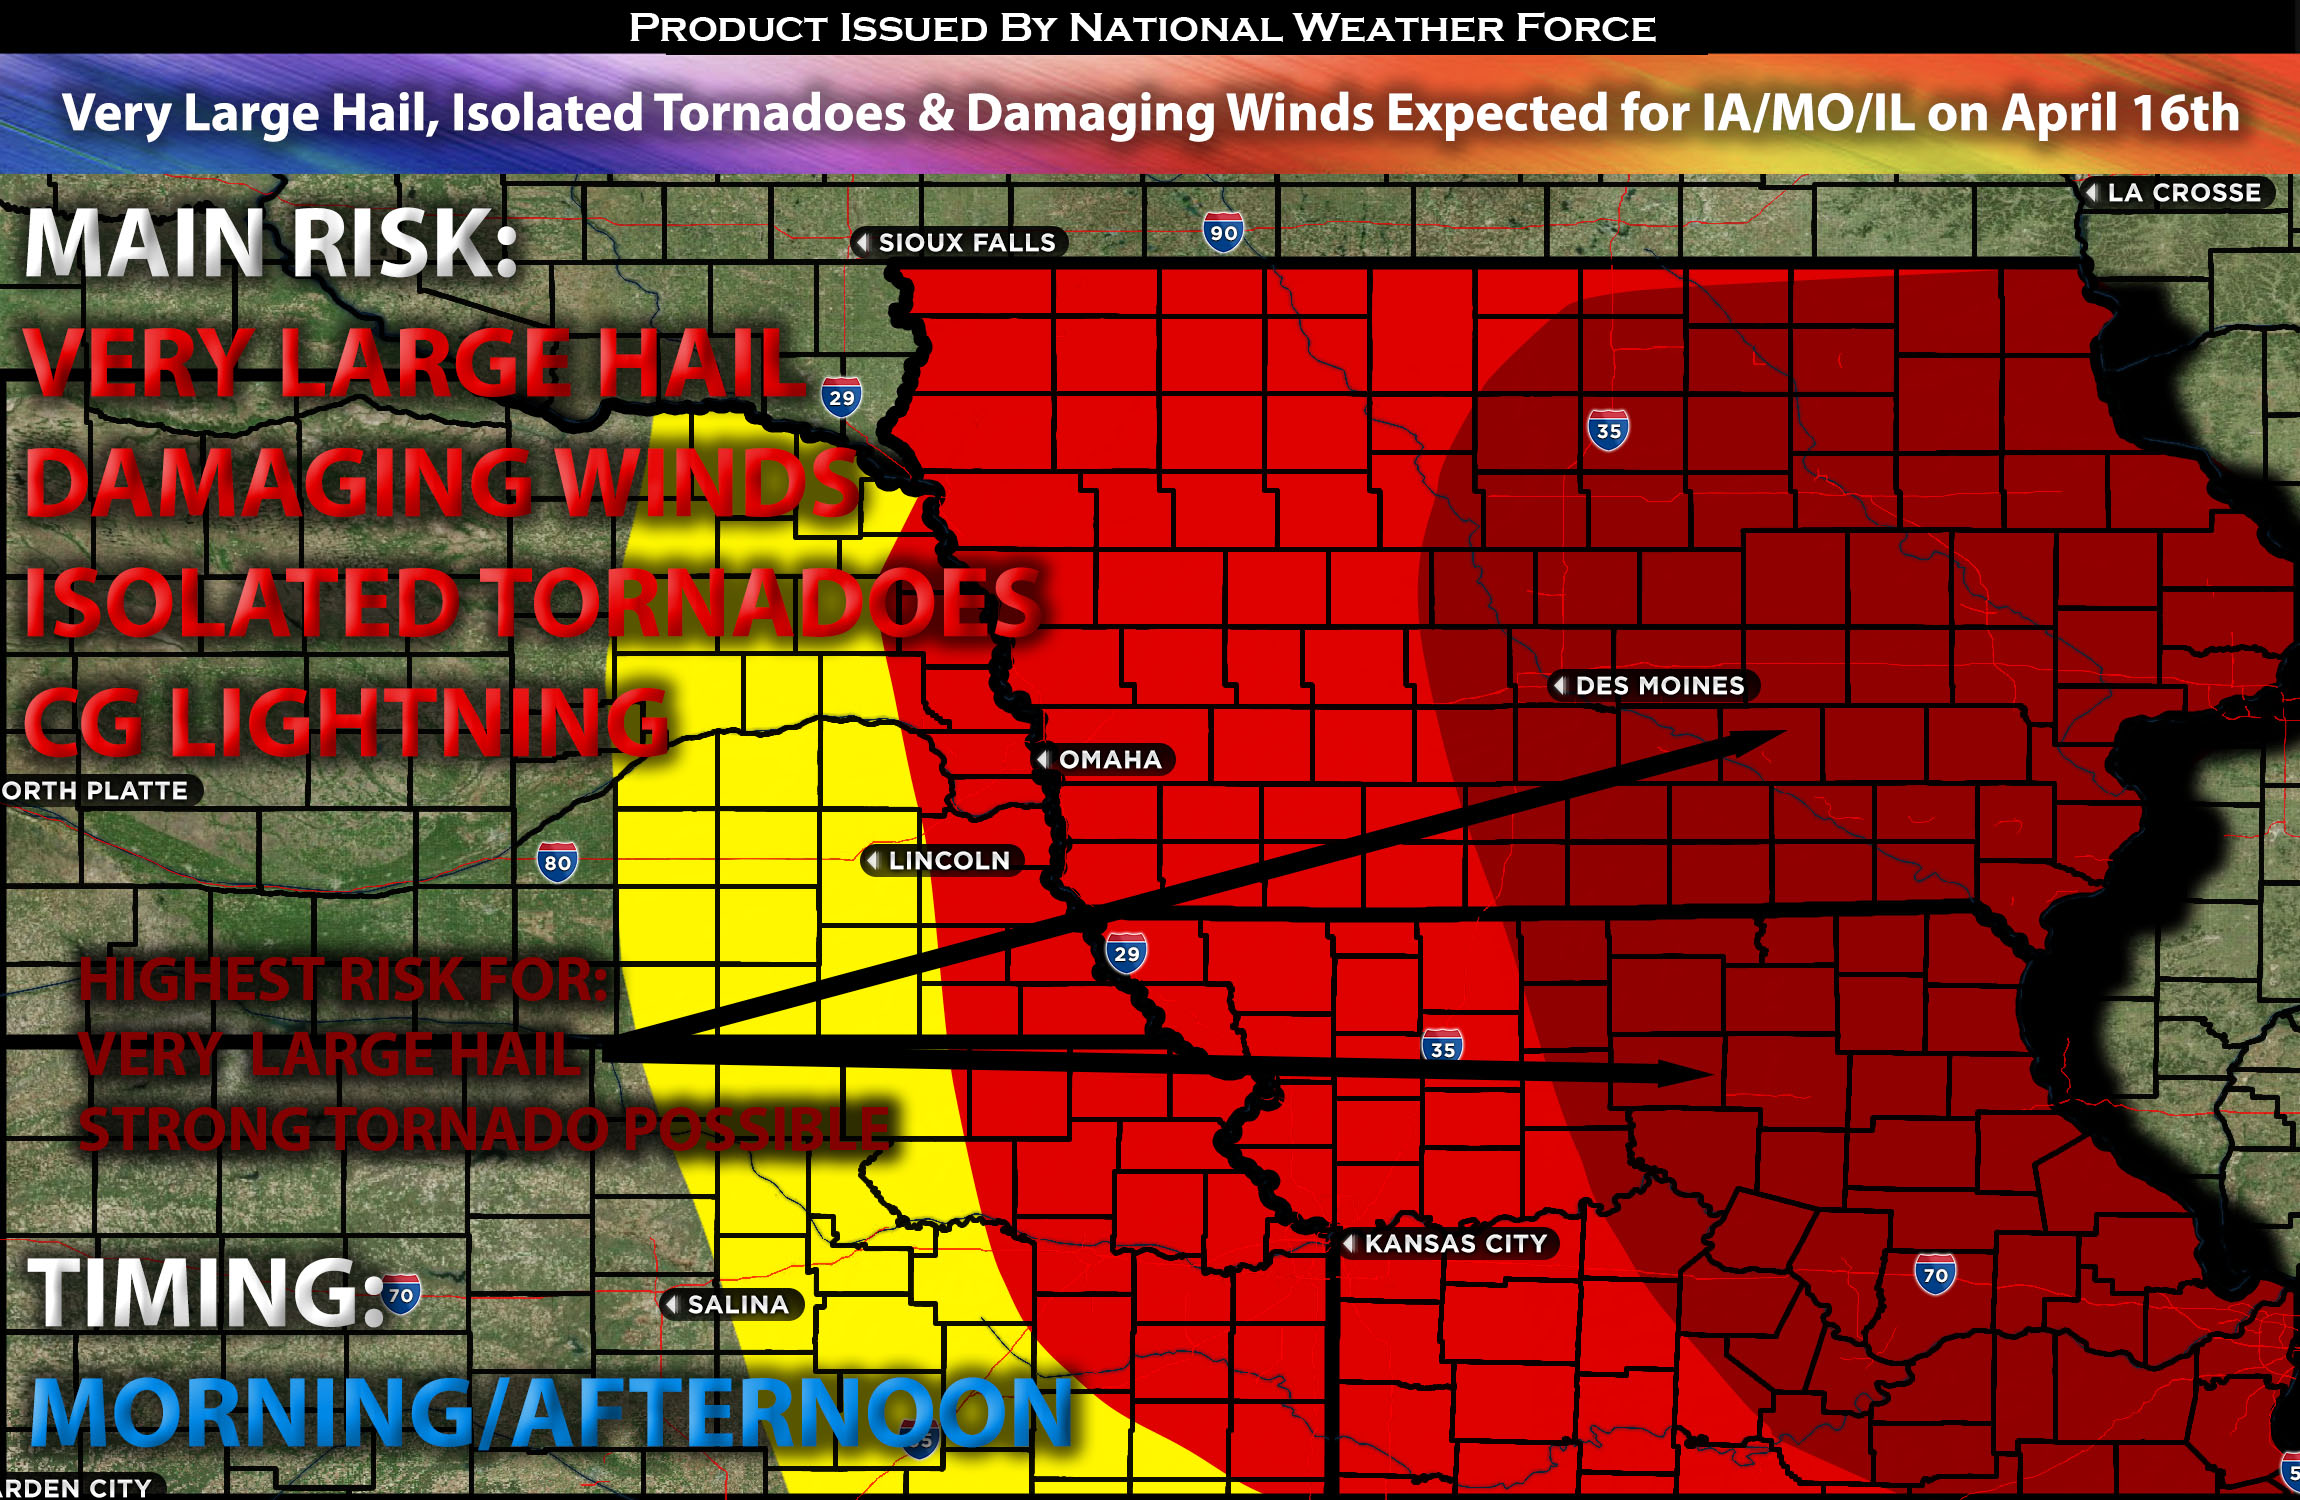 Very Large Hail, Isolated Tornadoes & Damaging Winds Expected for IA/MO/IL on April 16th